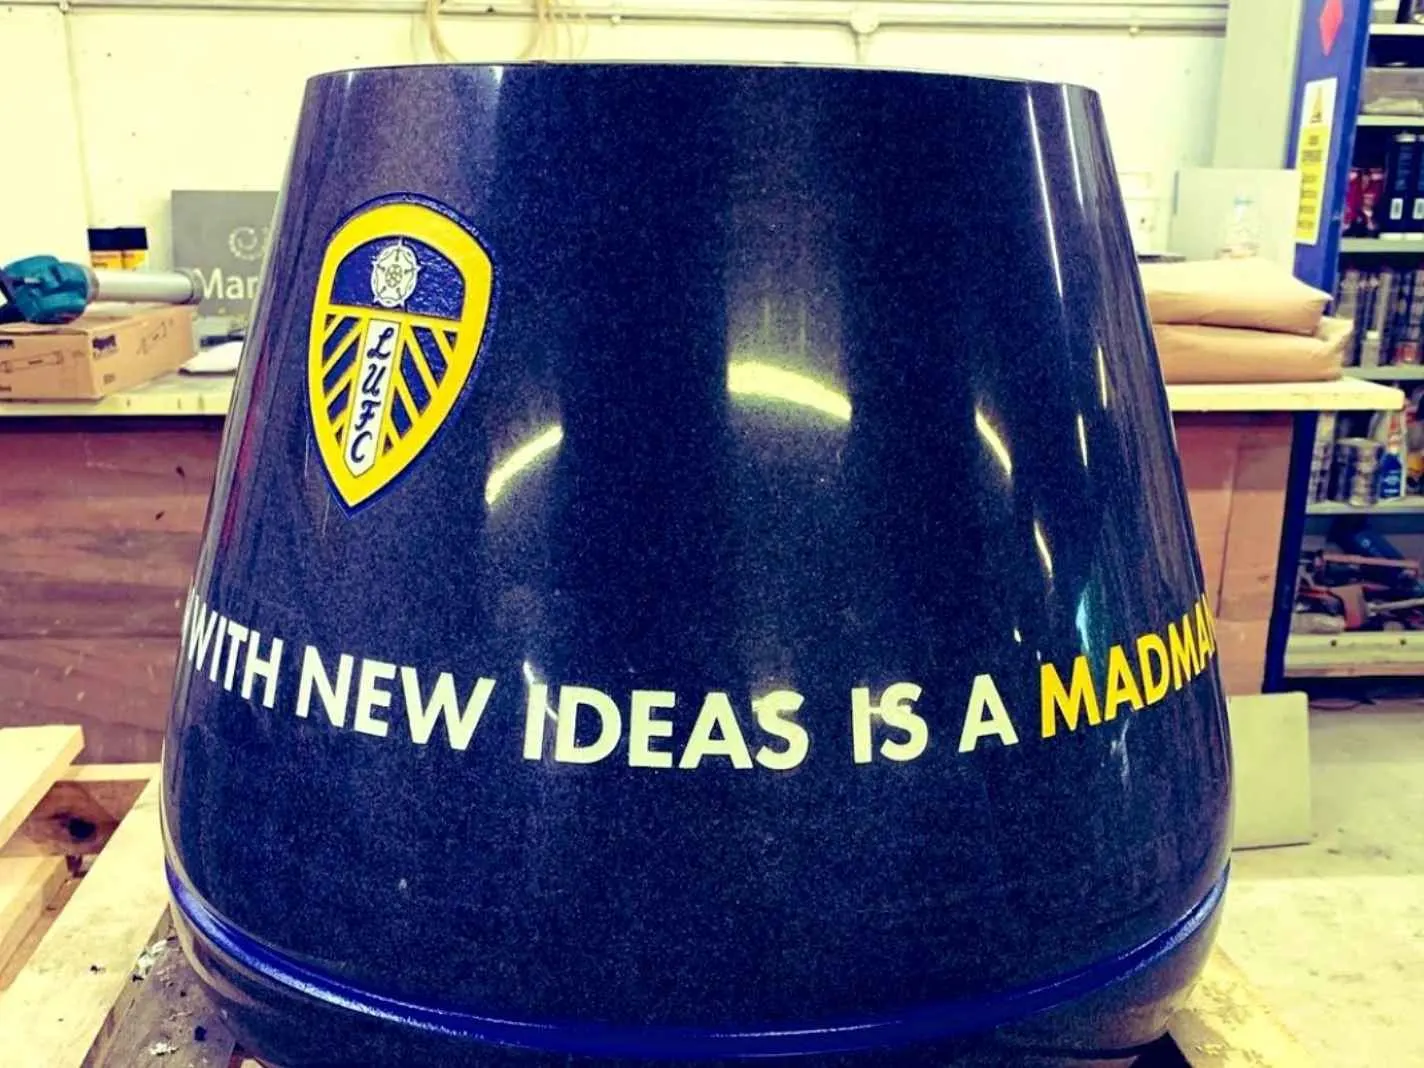 Rumors that Leeds United are going to honour Marcelo Bielsa with a special bucket